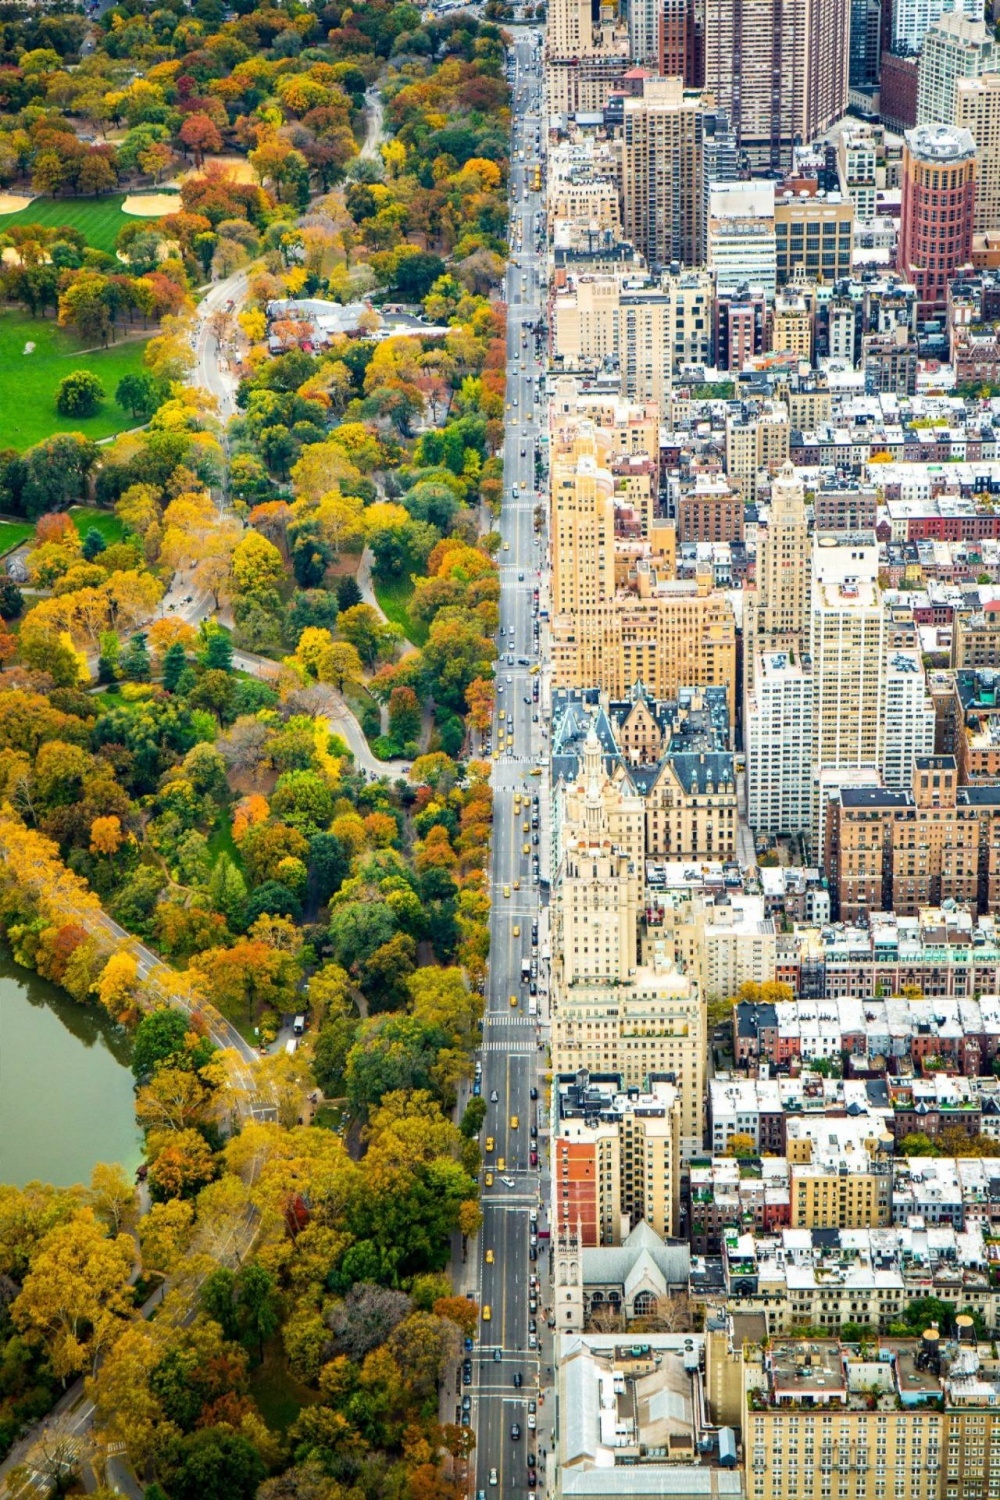 The 100 best photographs ever taken without photoshop - Two worlds divided, New York, USA